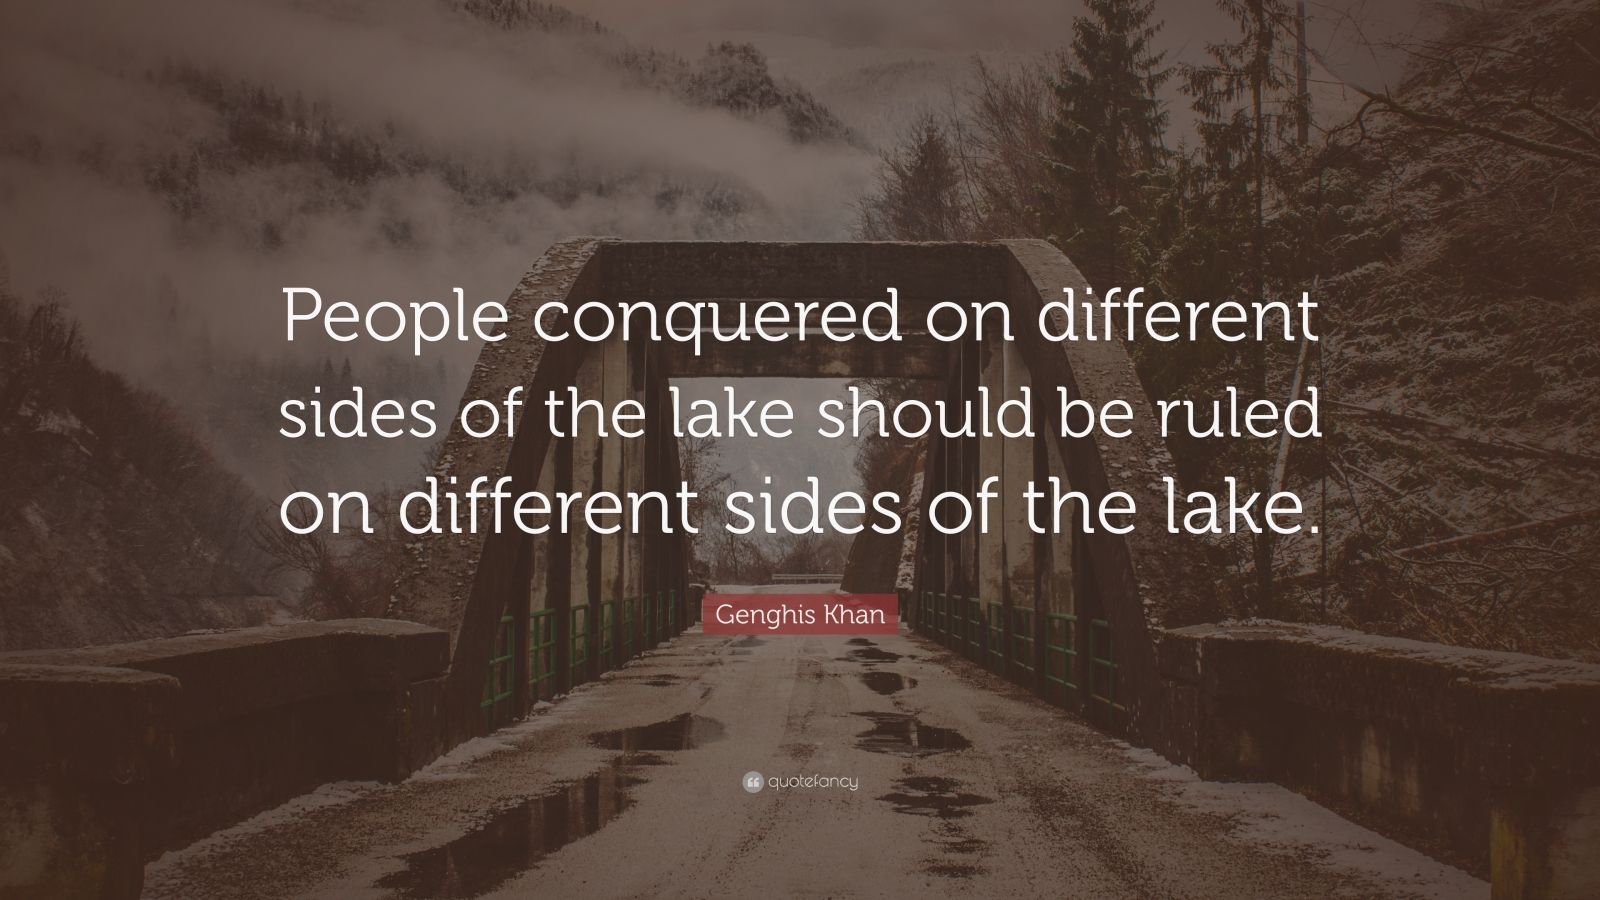 Genghis Khan Quote: “People conquered on different sides of the lake